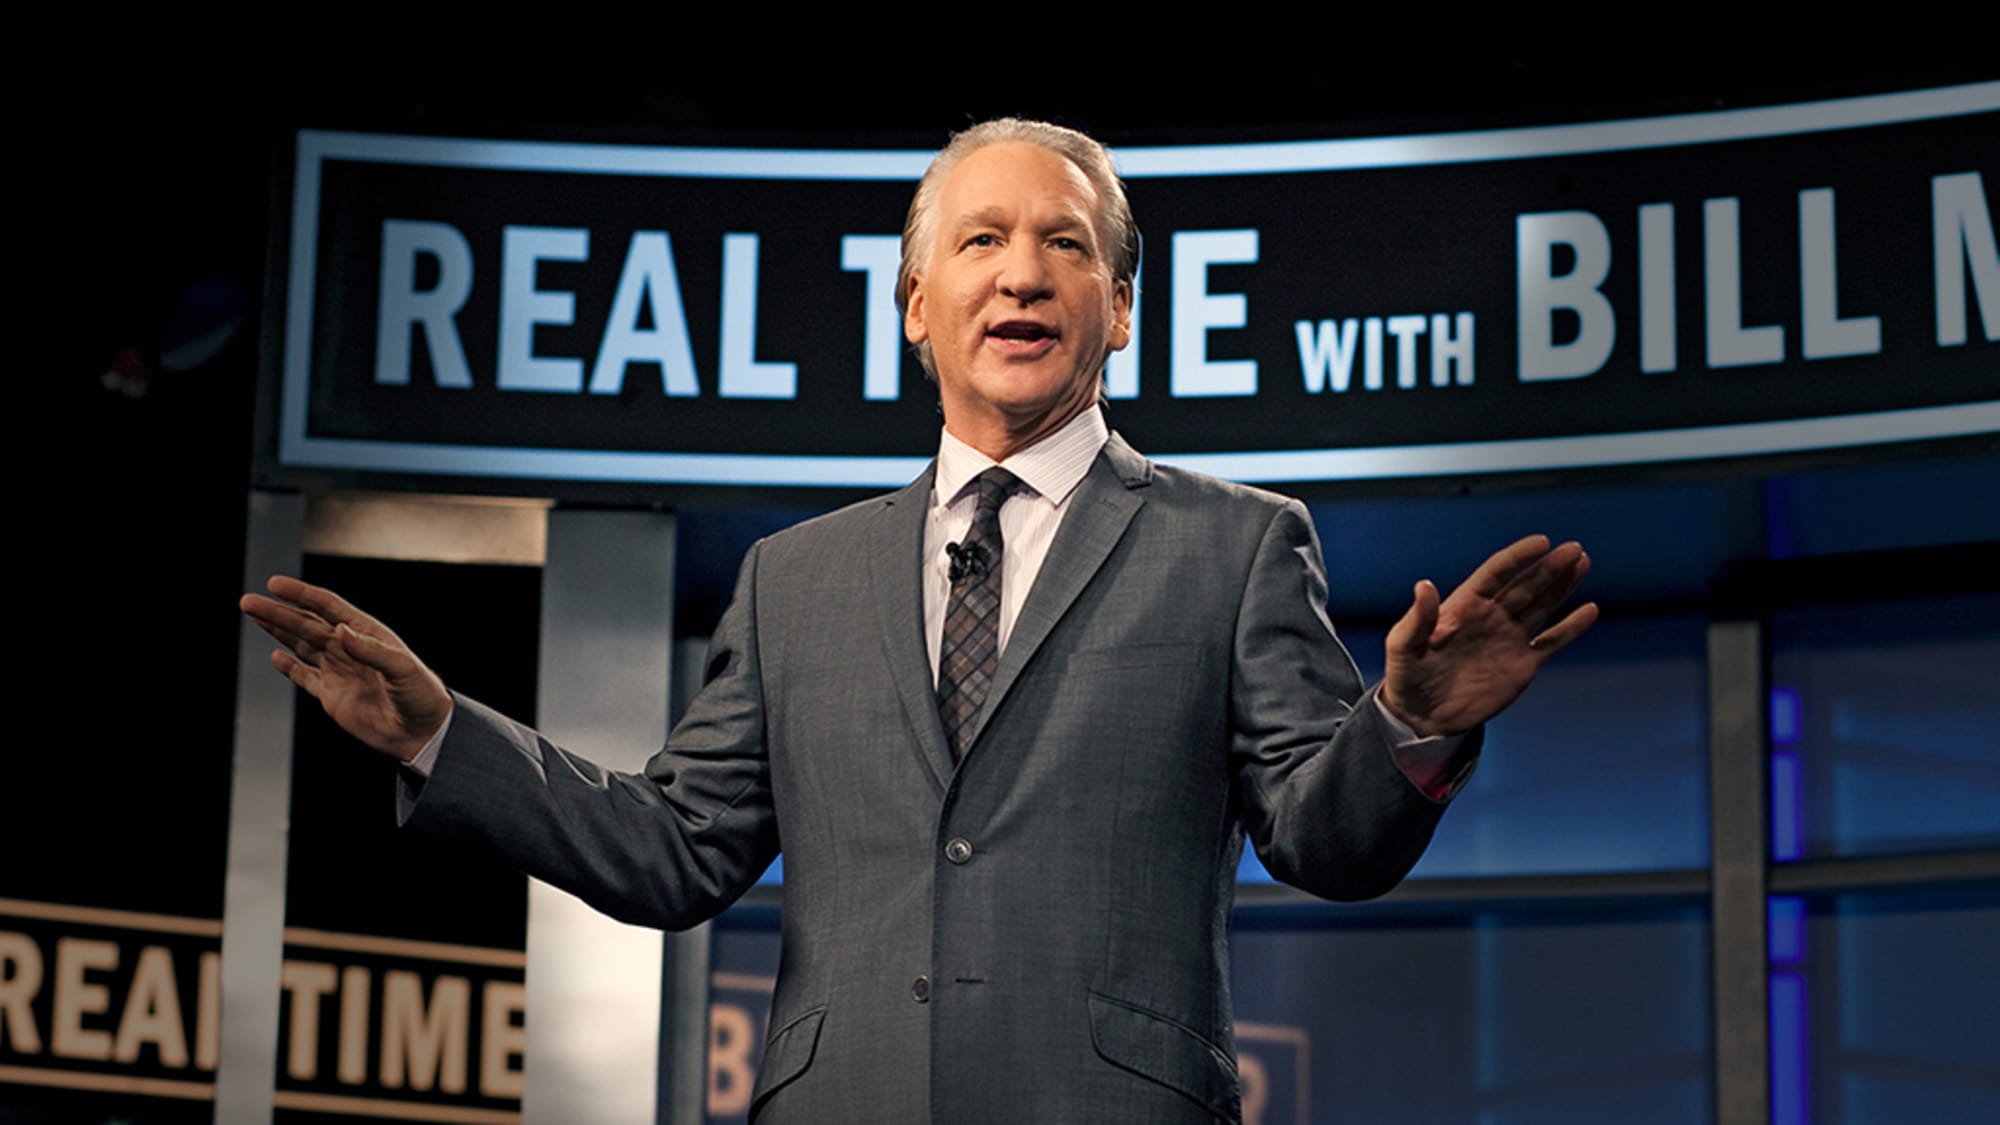 Is Real Time with Bill Maher new tonight, May 12th?